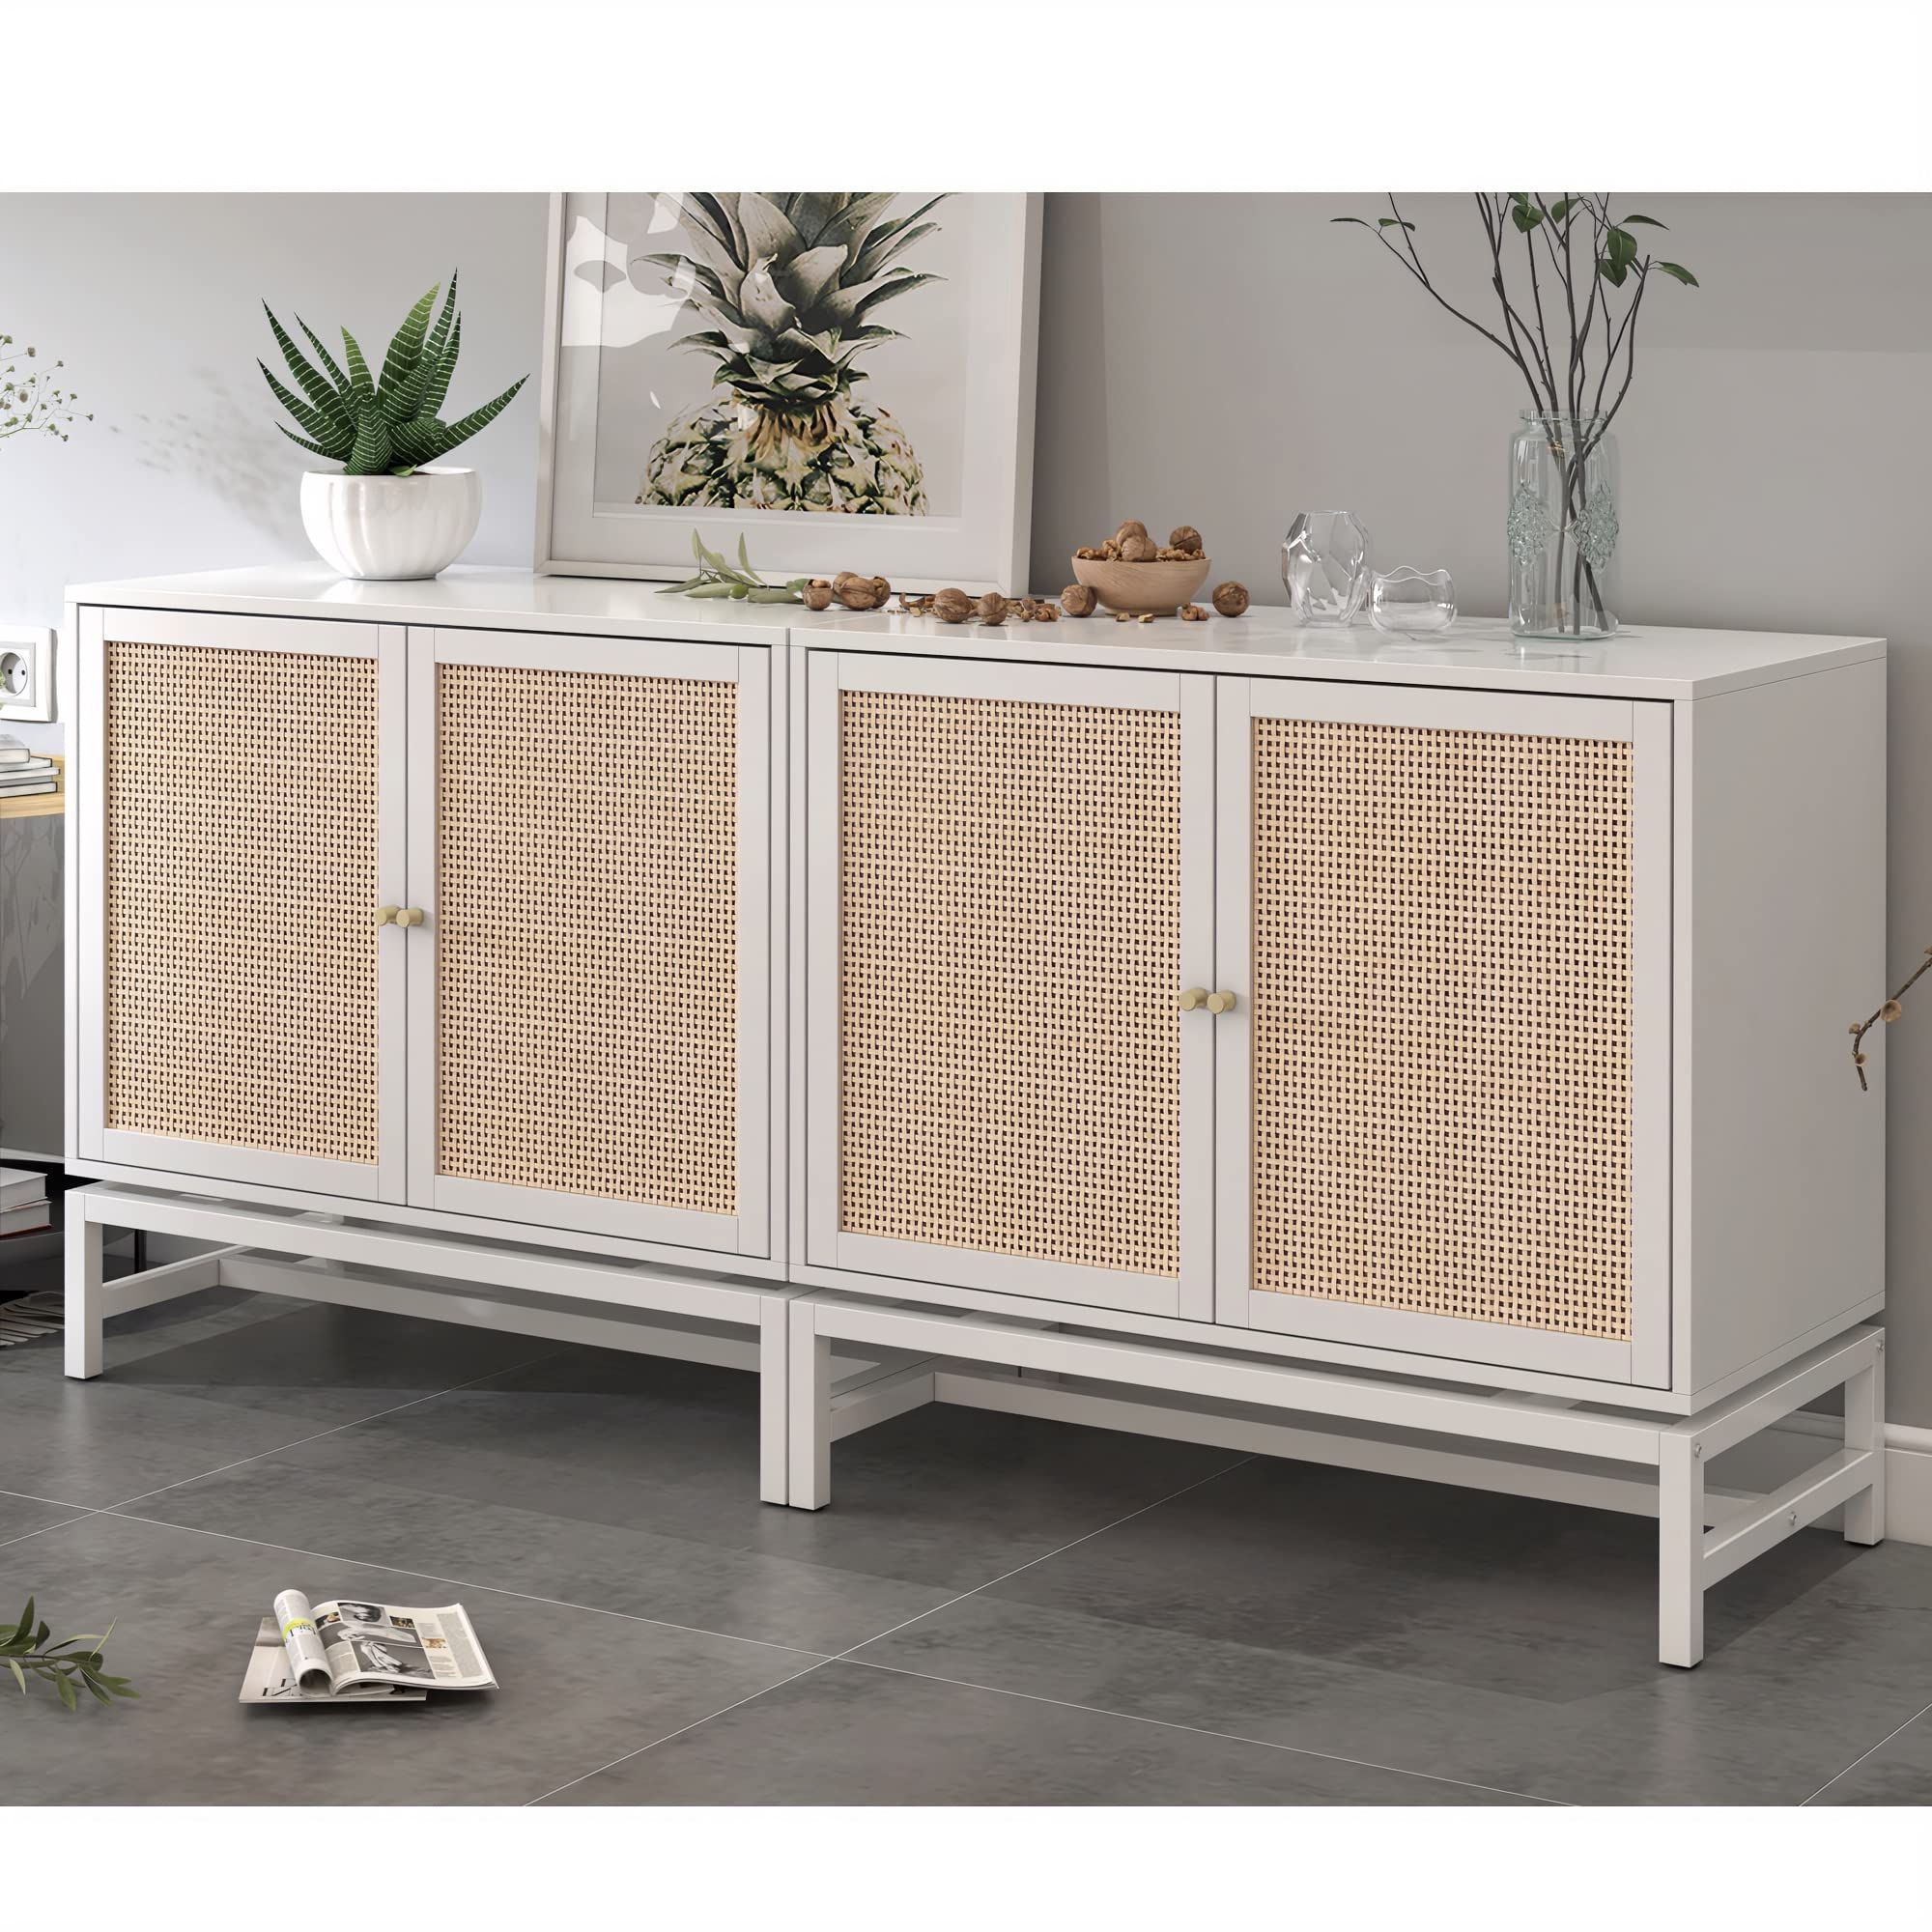 Amazon – Awqm 2pcs Rattan Sideboard Buffet Cabinet With  Storage,kithchen Accent Storage Cabinet With Doors Console Table With  Adjustable Shelves,wood Console Cabinet For Dining Room,living Room,white –  Buffets & Sideboards Pertaining To Recent Assembled Rattan Buffet Sideboards (View 6 of 10)